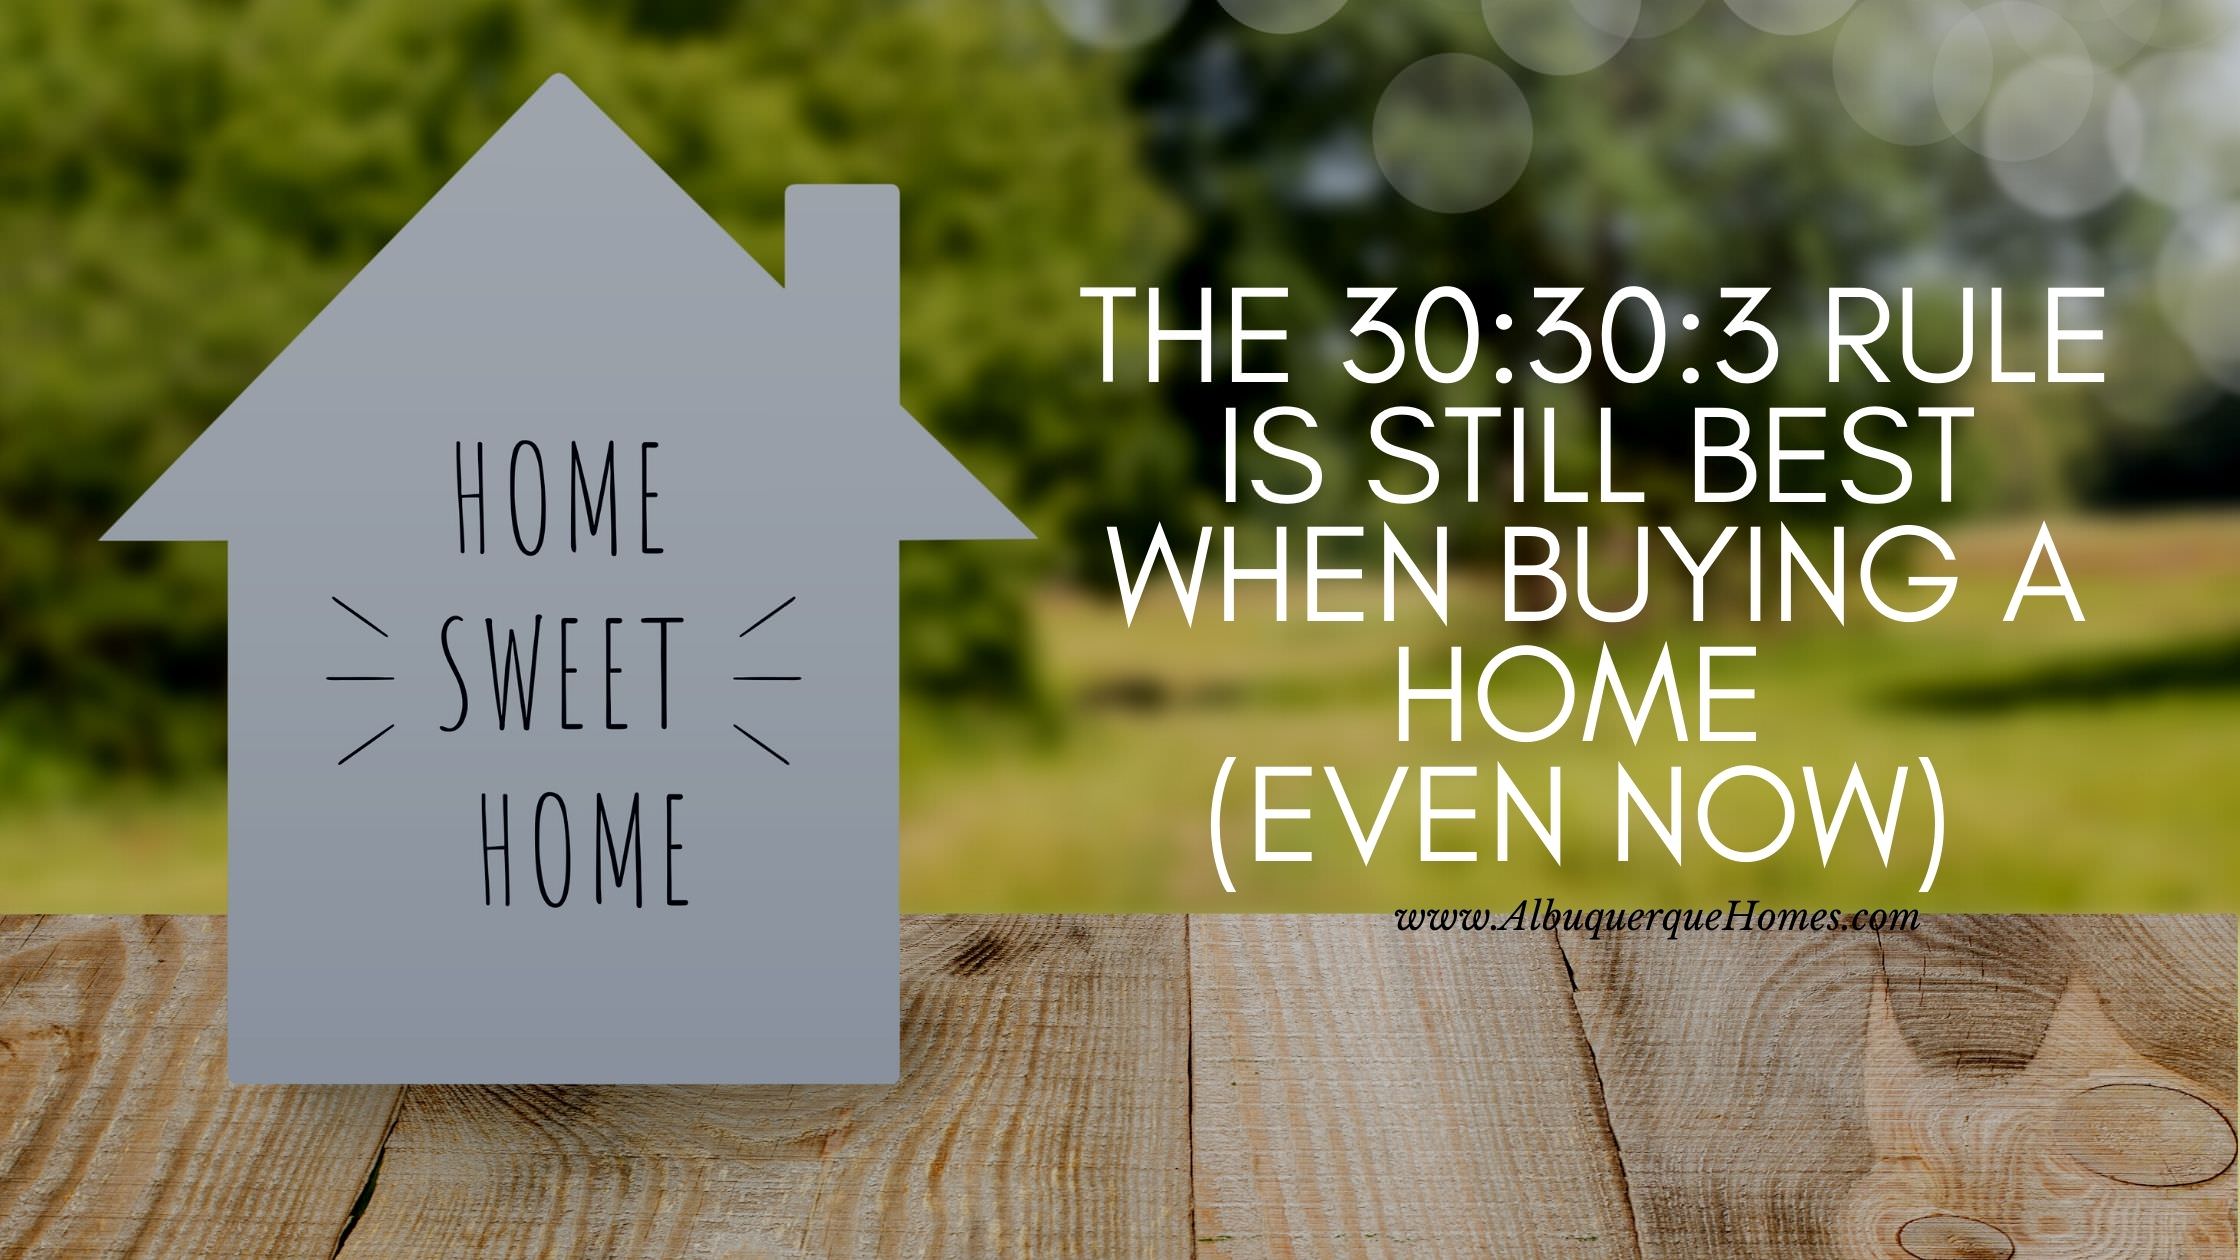 The 30:30:3 Rule is Still Best When Buying a Home (Even Now)